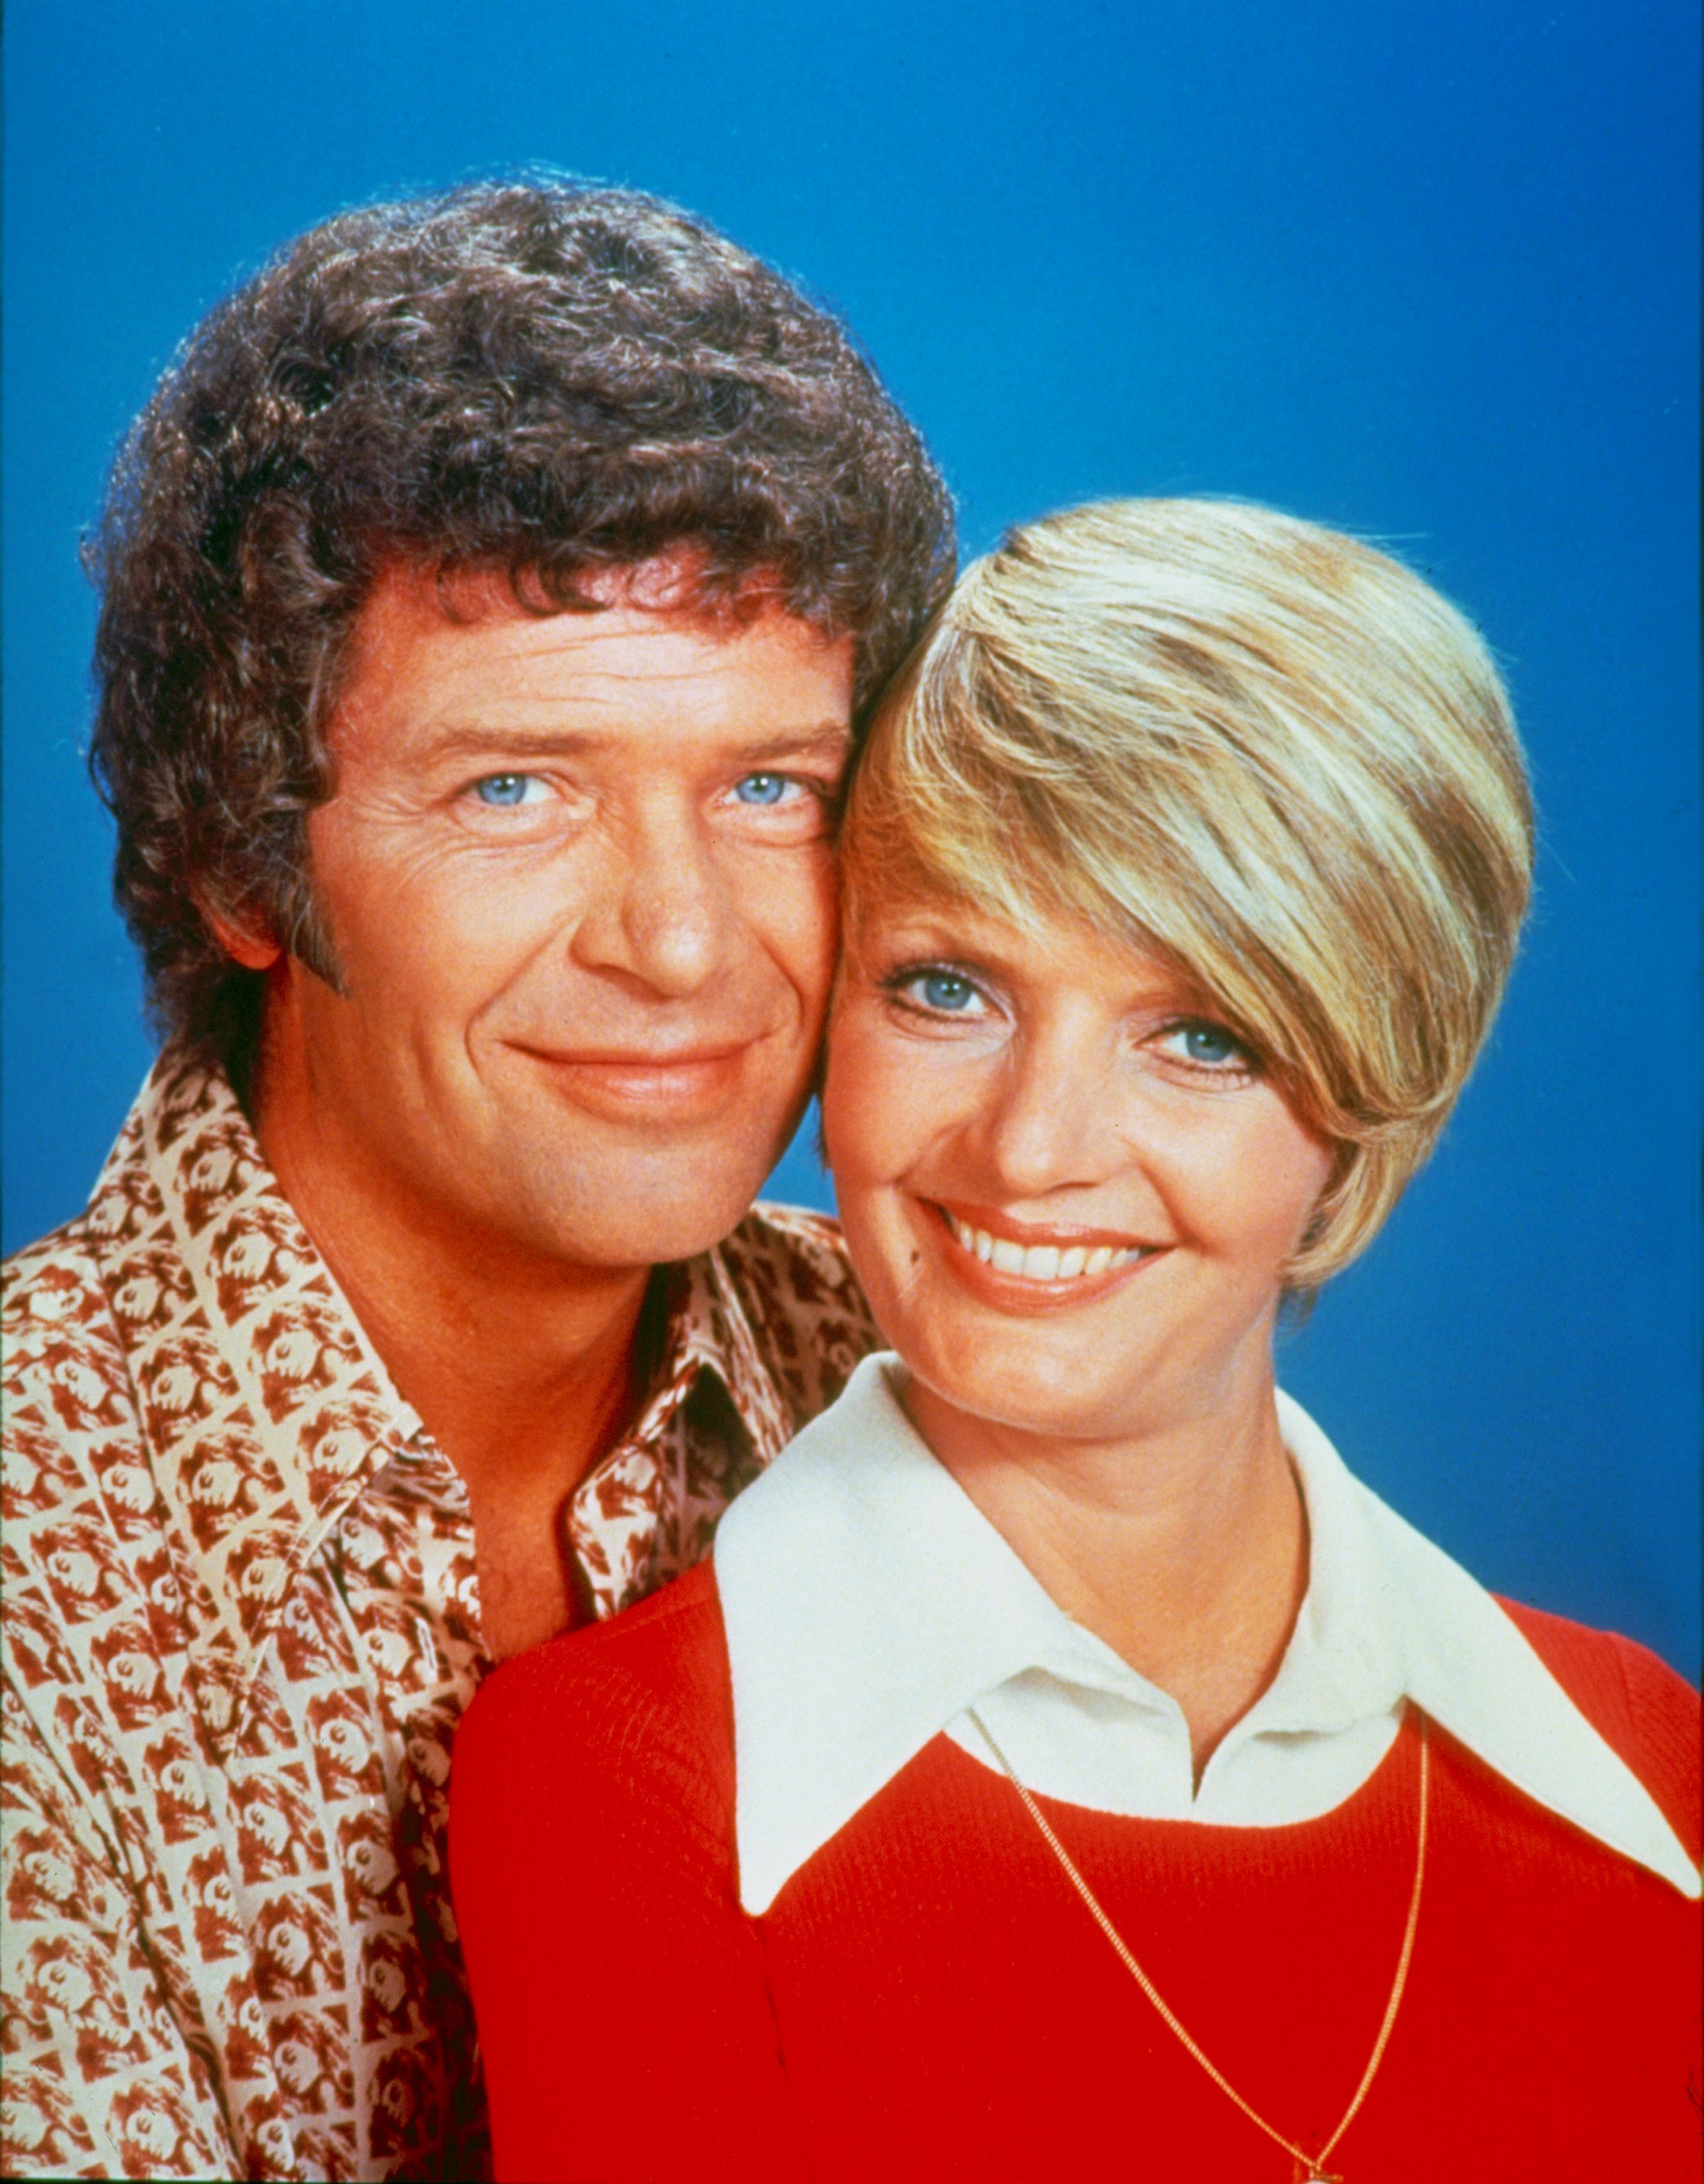 Robert Reed and Florence Henderson on season four of "The Brady Bunch" in 1972 | Source: Getty Images